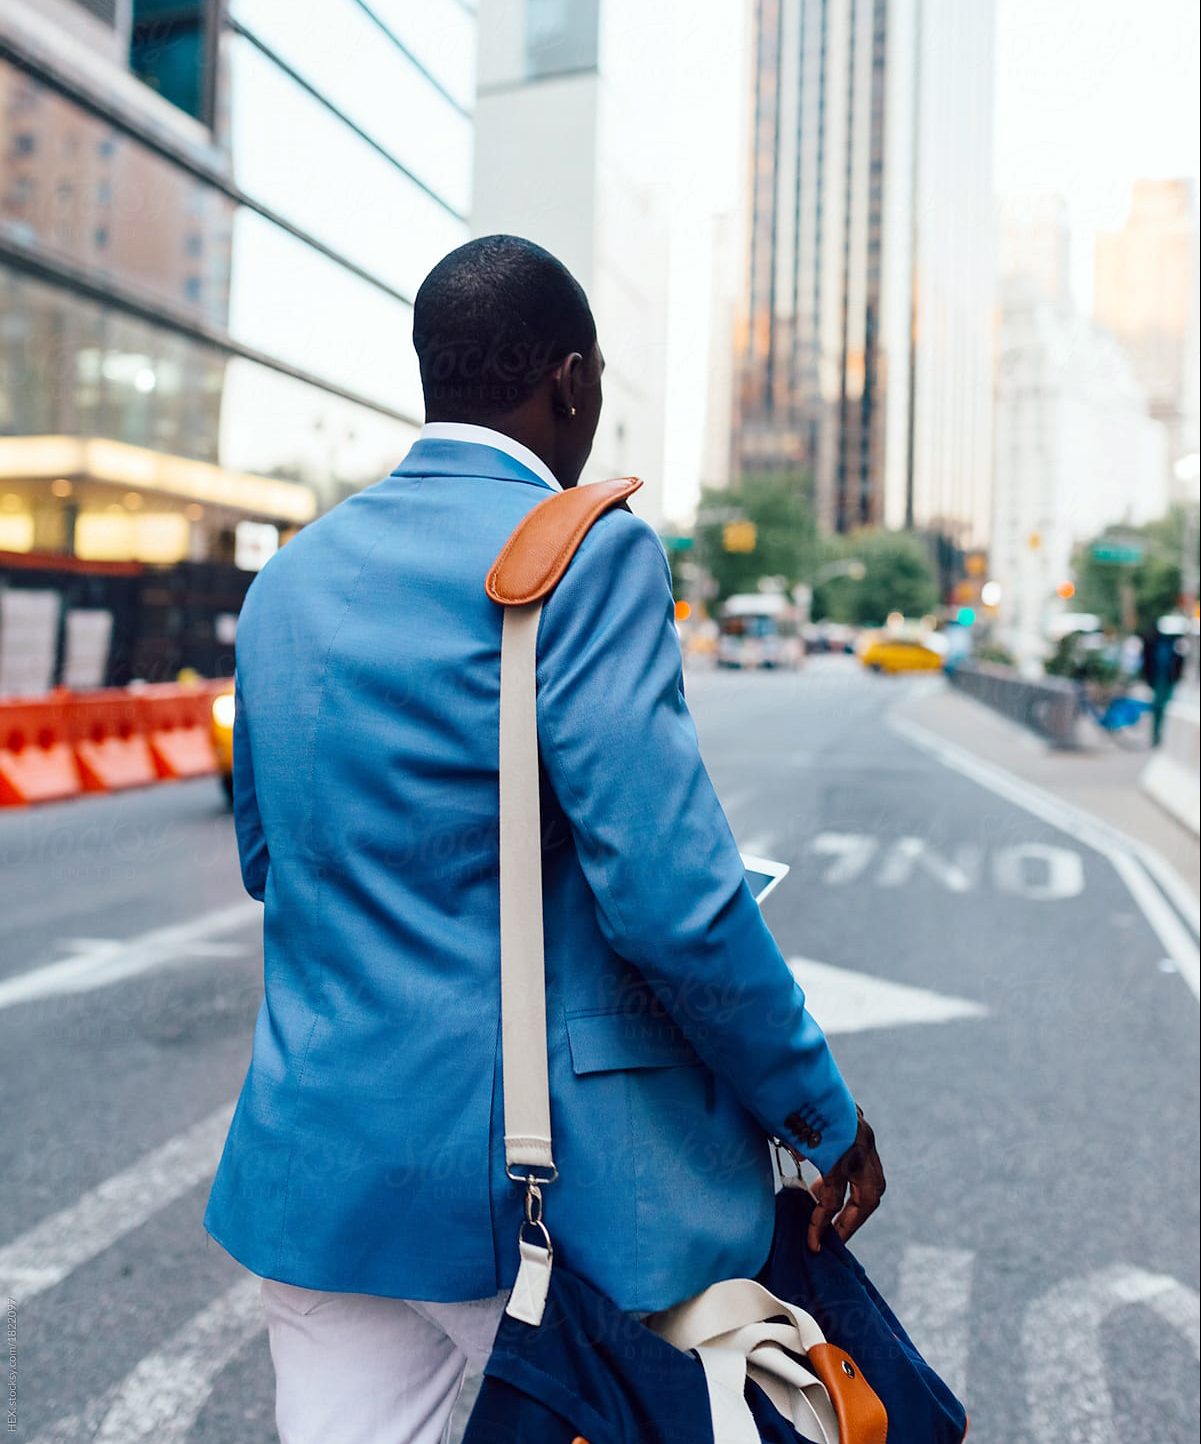 Business man in blue suit jacket holding a cell phone and messenger bag crosses the street